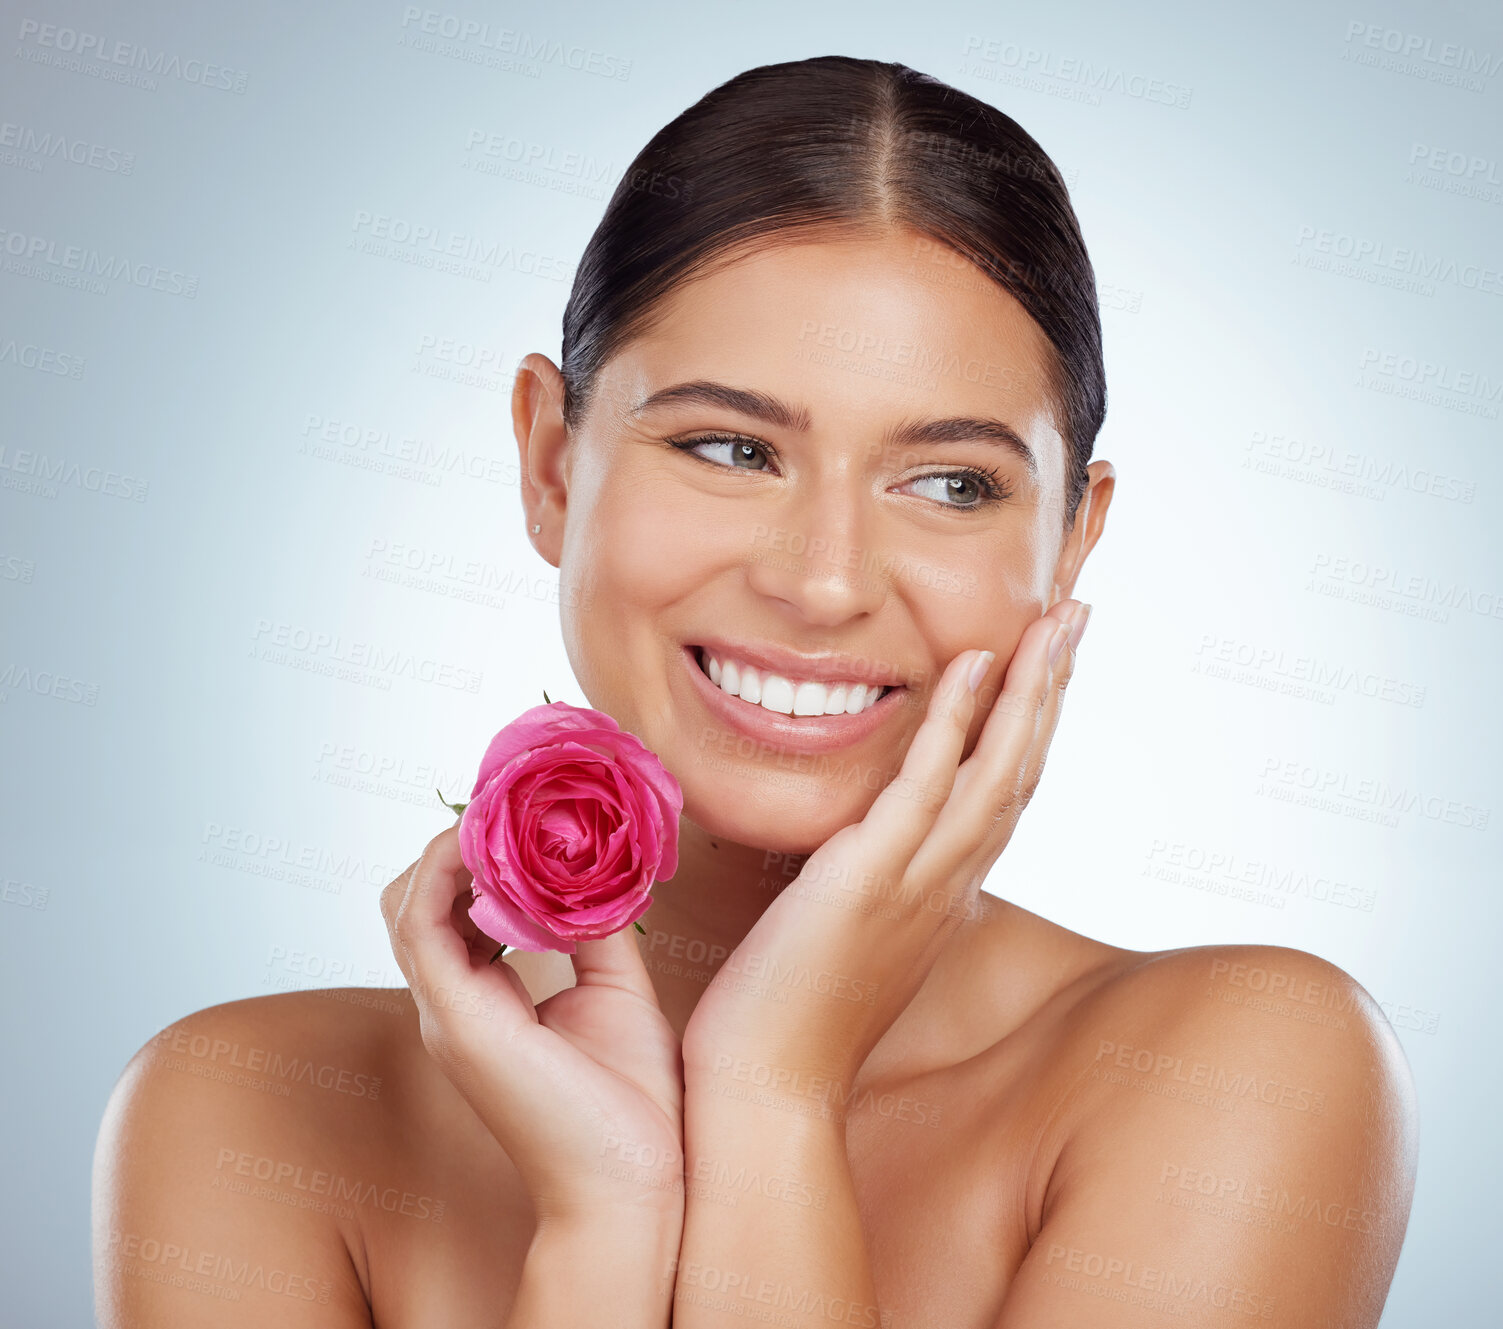 Buy stock photo Smiling beautiful woman holding pink rose while posing topless with copyspace. Caucasian model isolated against grey studio background with smooth glowing skin and delicate healthy skincare routine